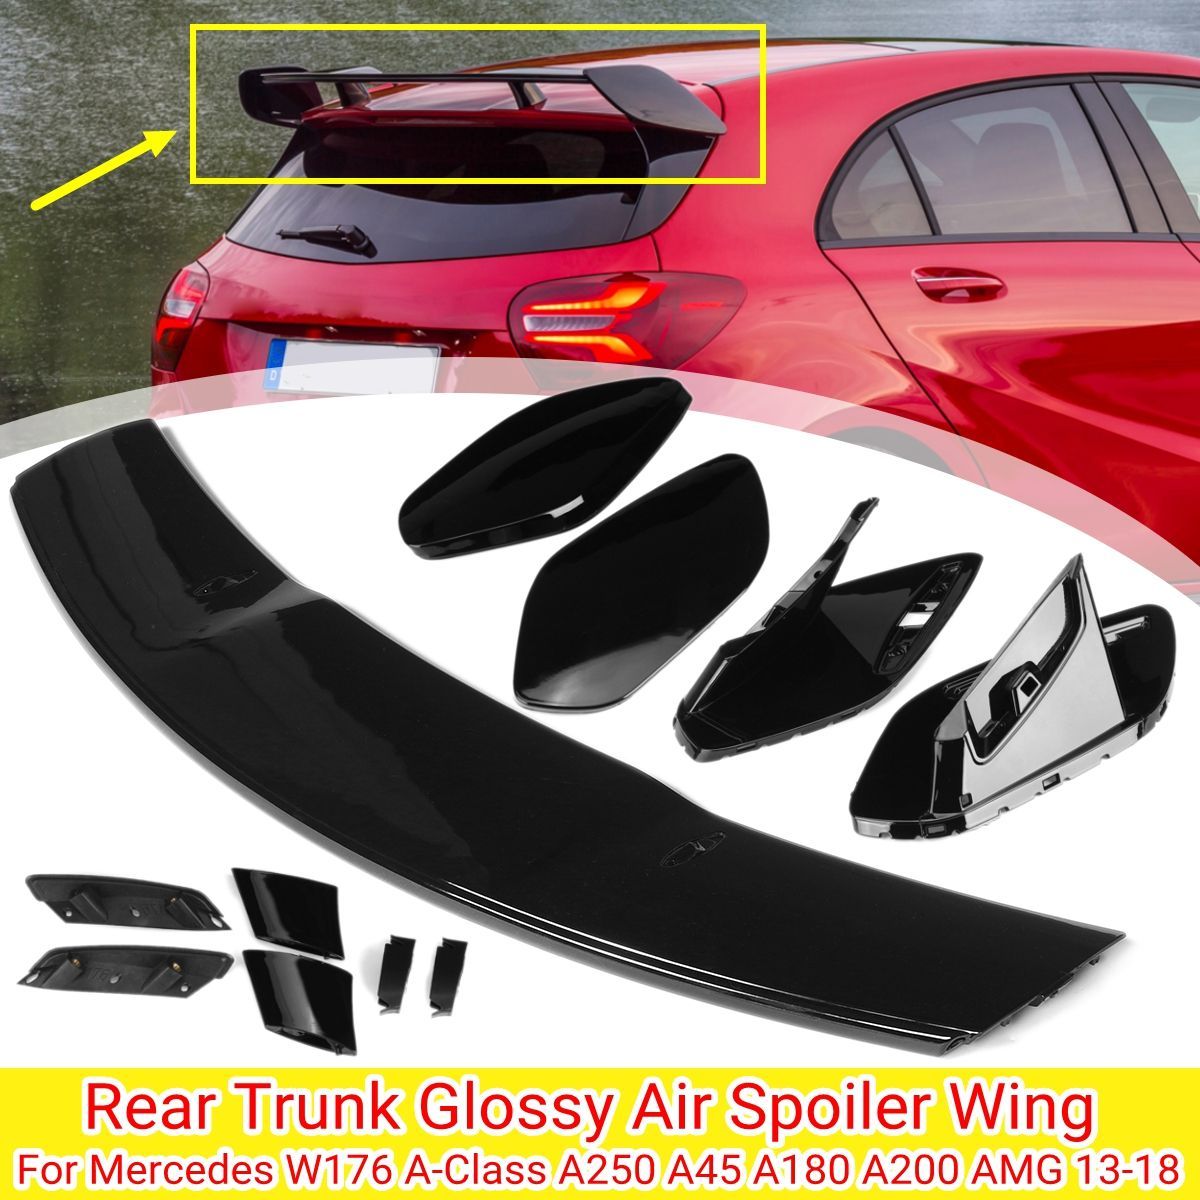 Car-Rear-Trunk-Glossy-Air-Spoiler-Wing-For-Mercedes-For-Benz-W176-A-Class-A250-A45-A180-A200-AMG-201-1705514